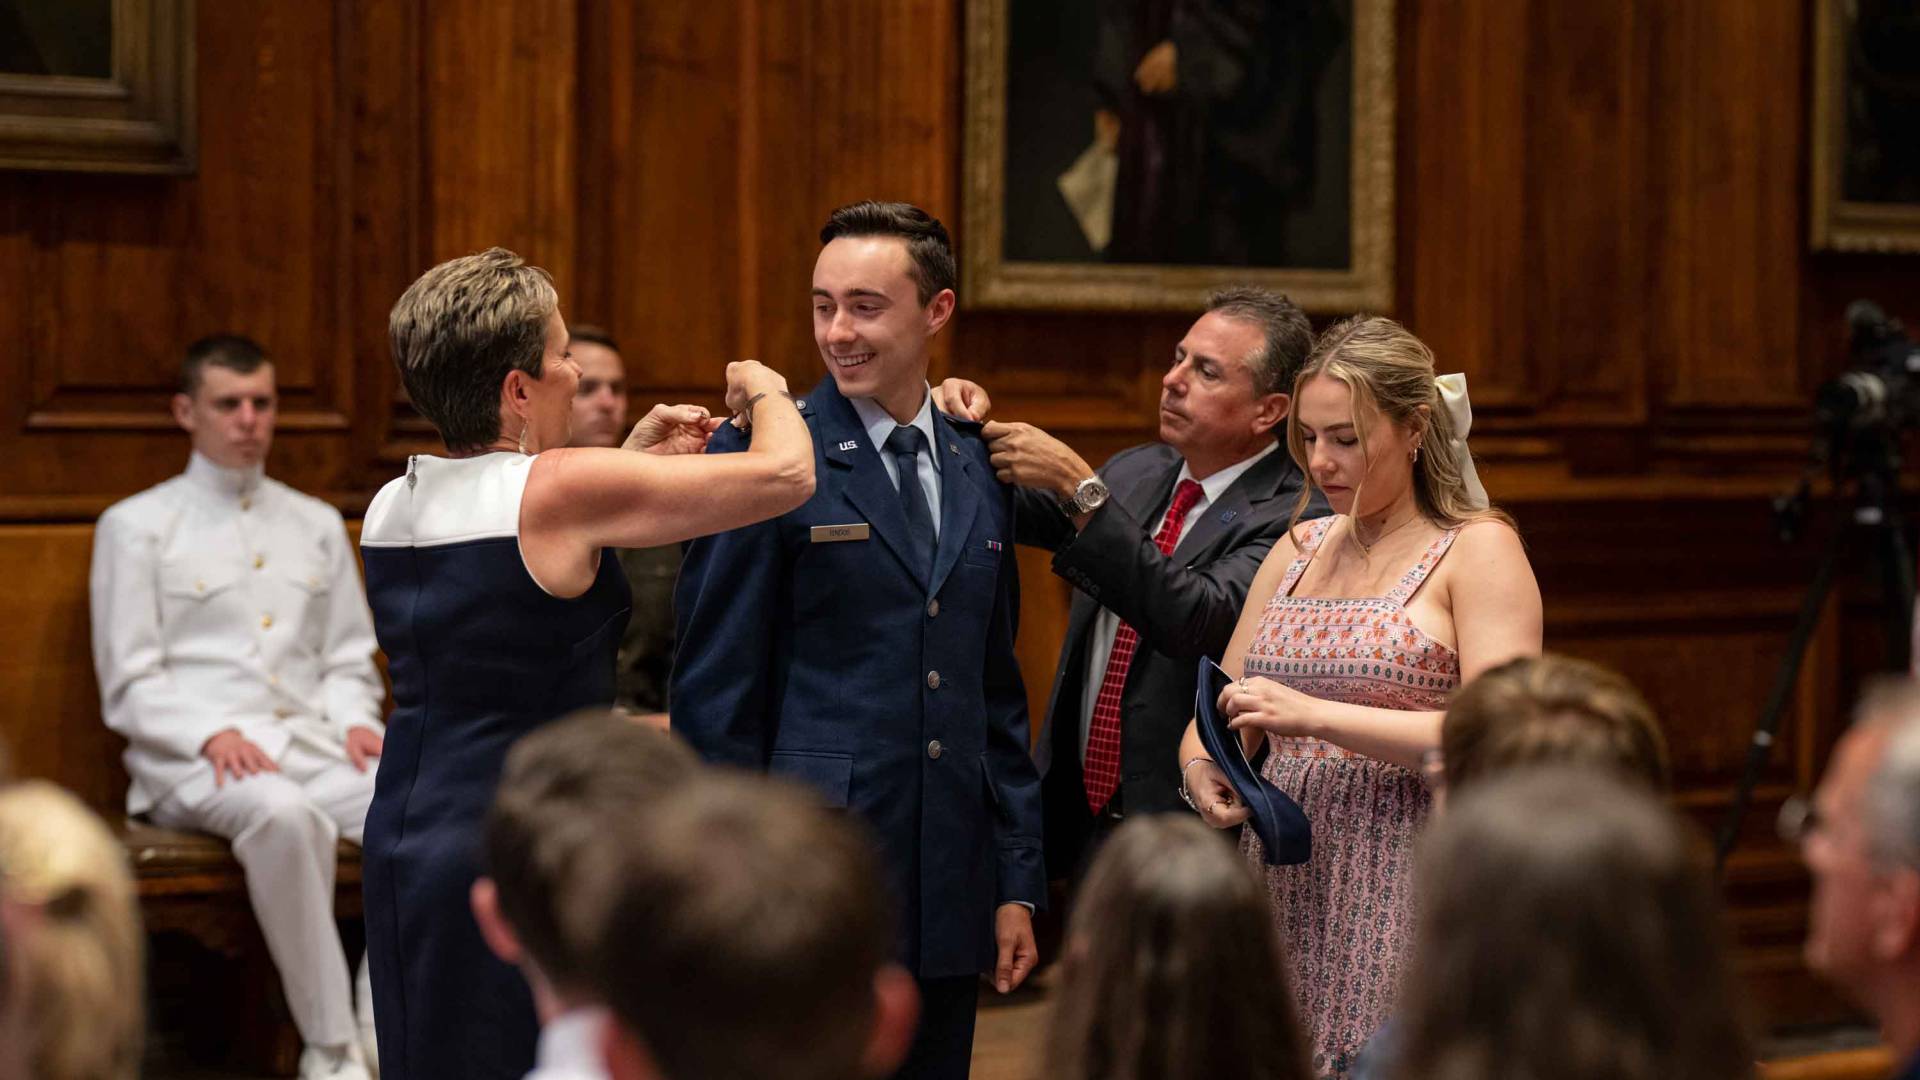 ROTC cadet receiving pins from family members